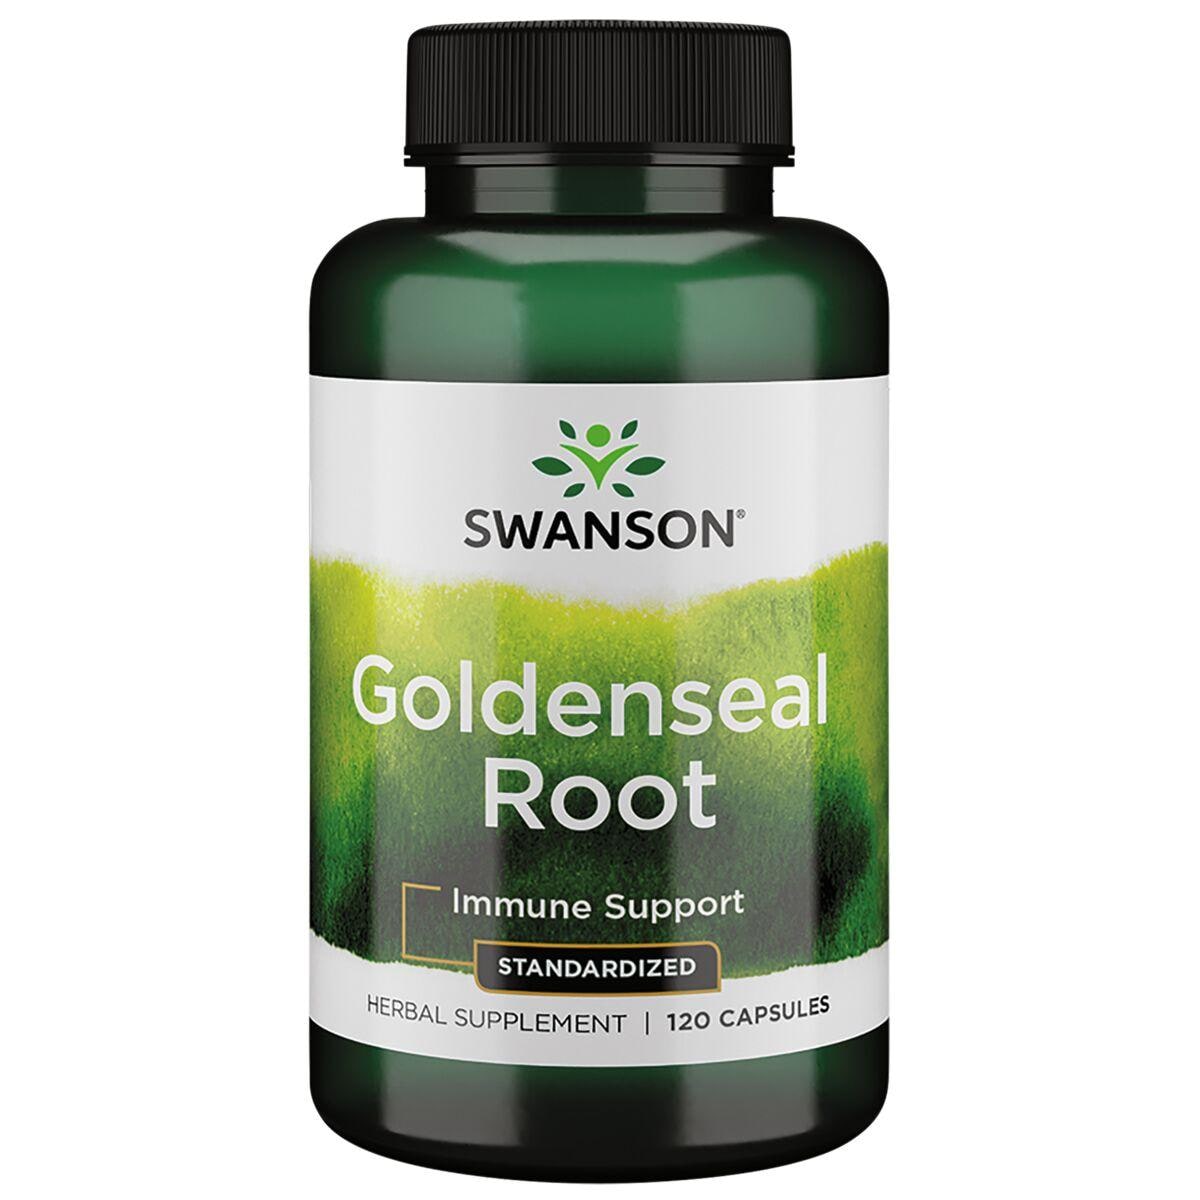 Swanson Superior Herbs Goldenseal Root - Standardized Vitamin 120 Caps Herbs and Supplements